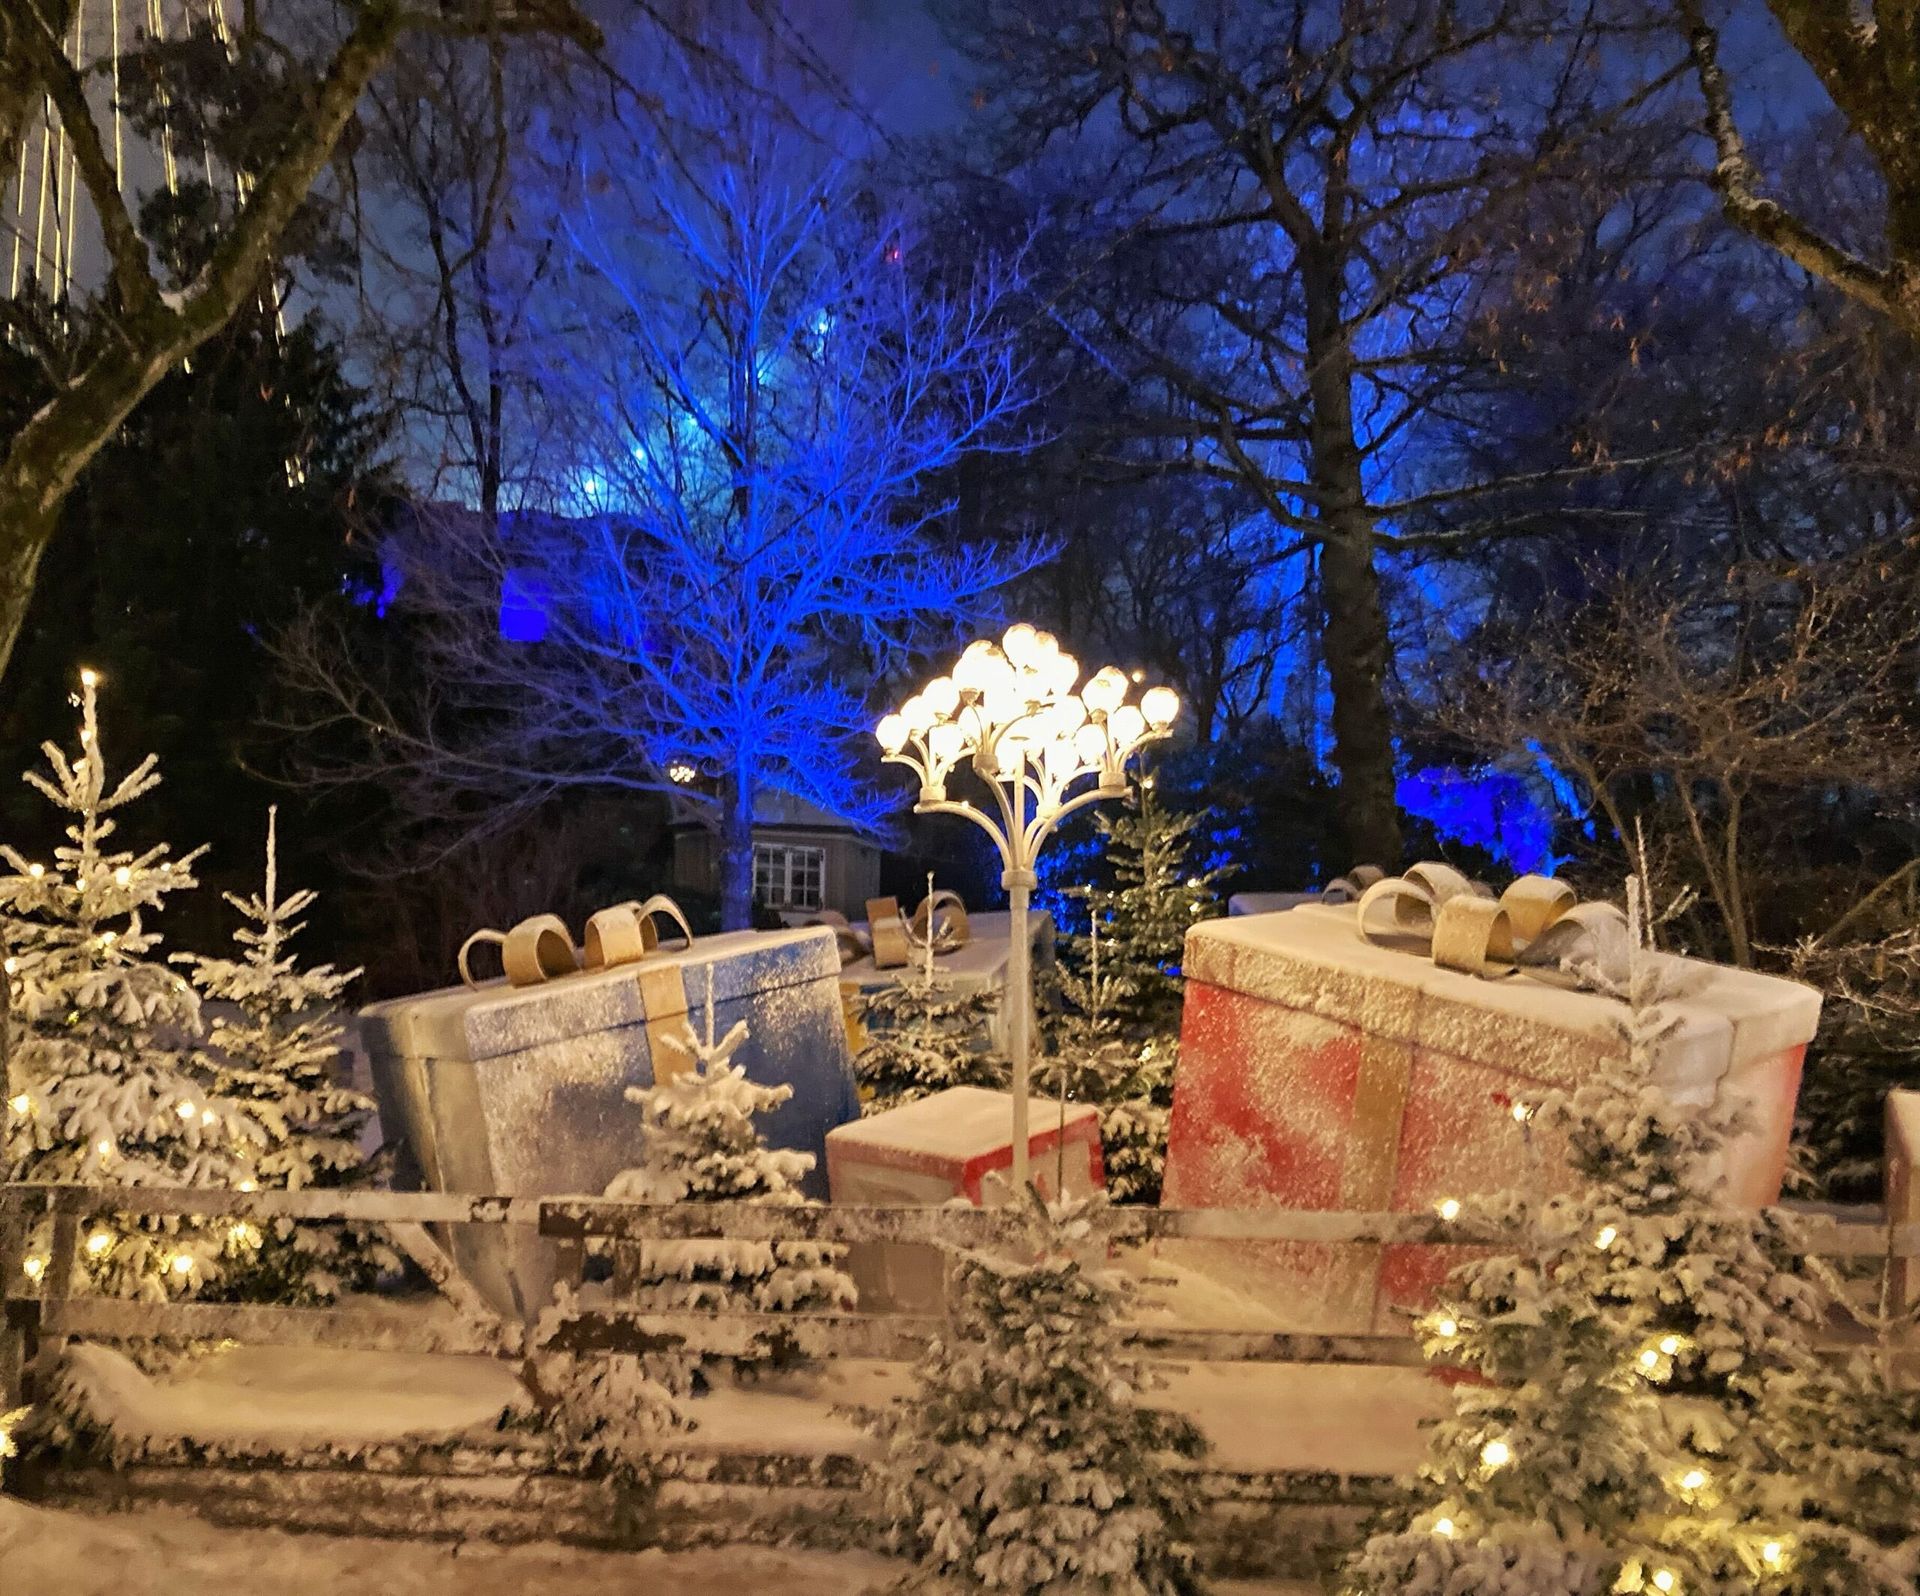 Outdoor decorations covered in snow, featuring oversized Christmas presents.